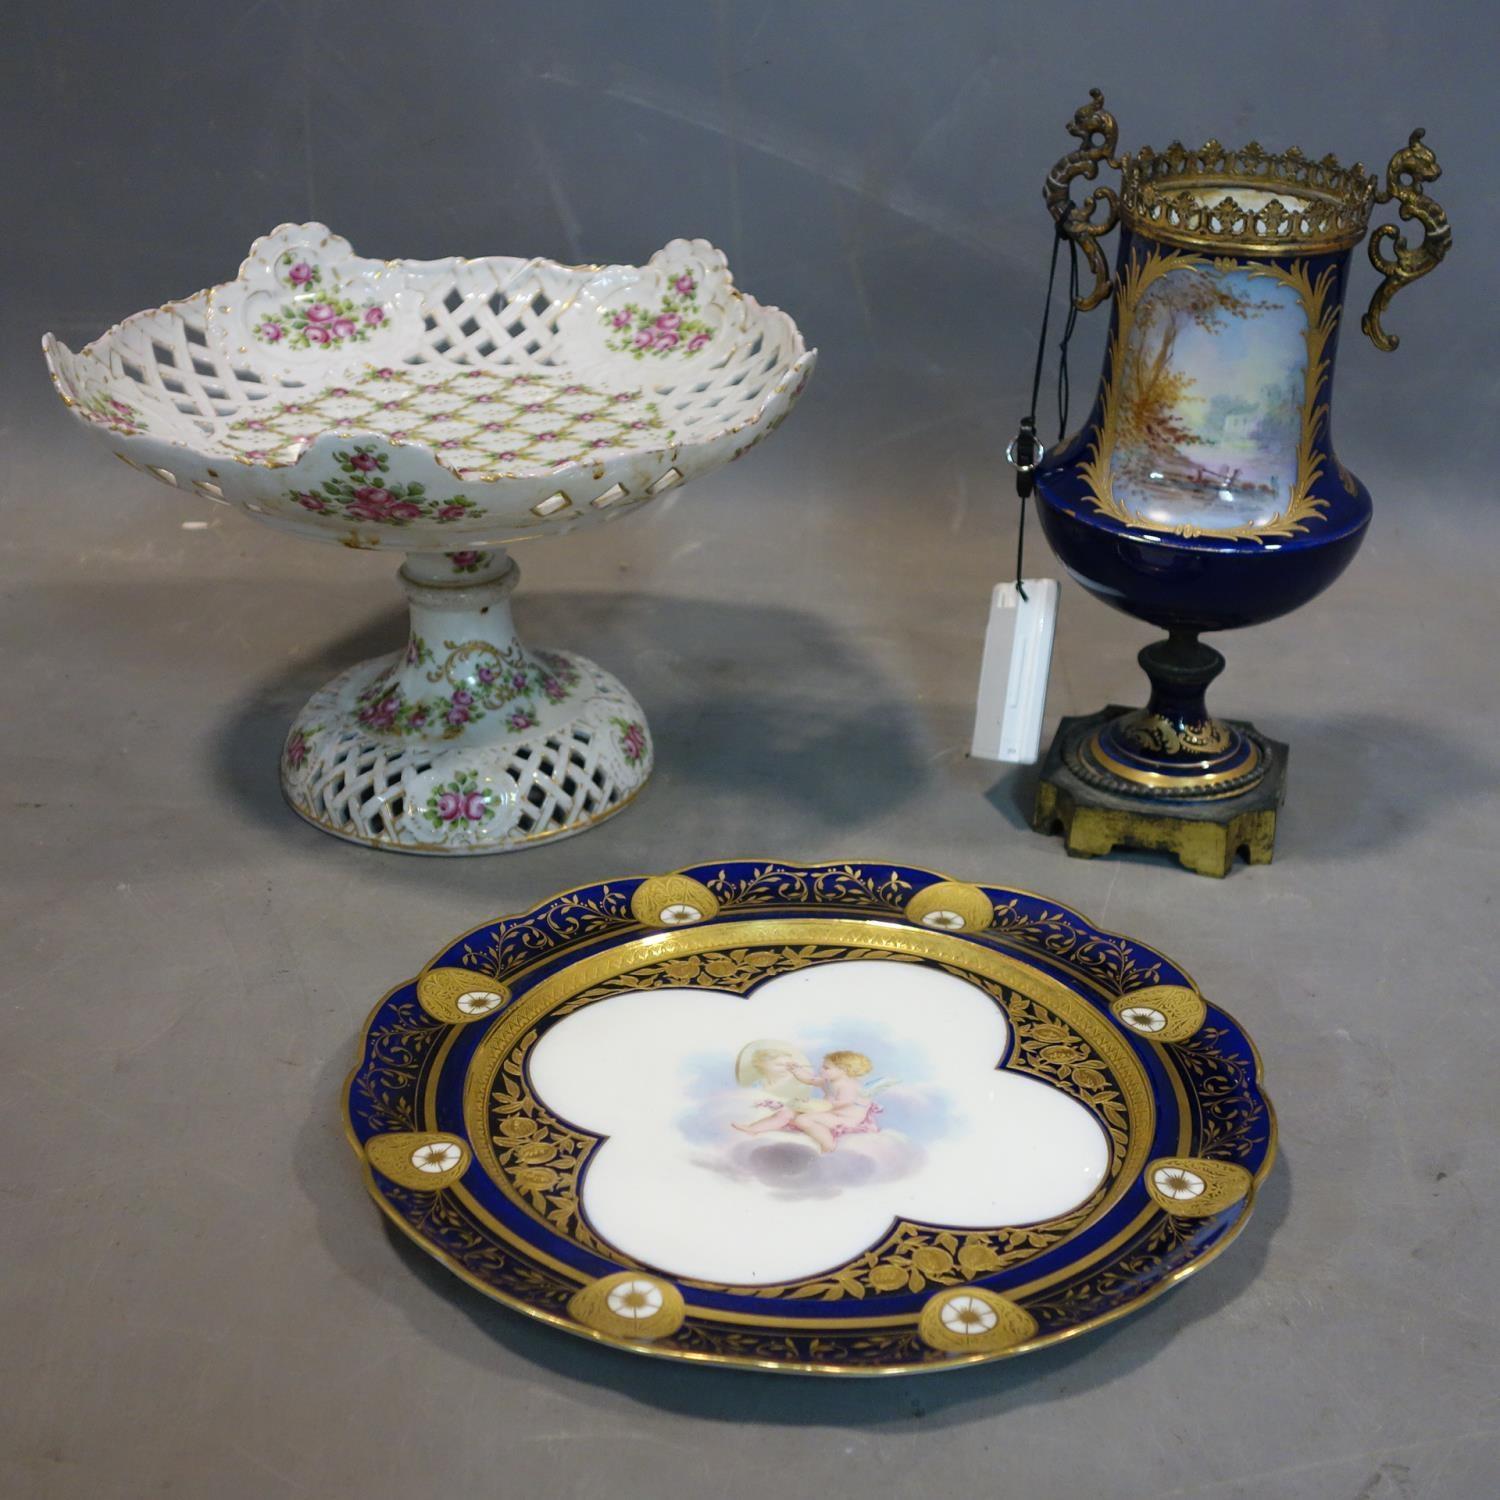 A 19th century French porcelain and gilt metal urn, signed and lacking cover, together with a 19th